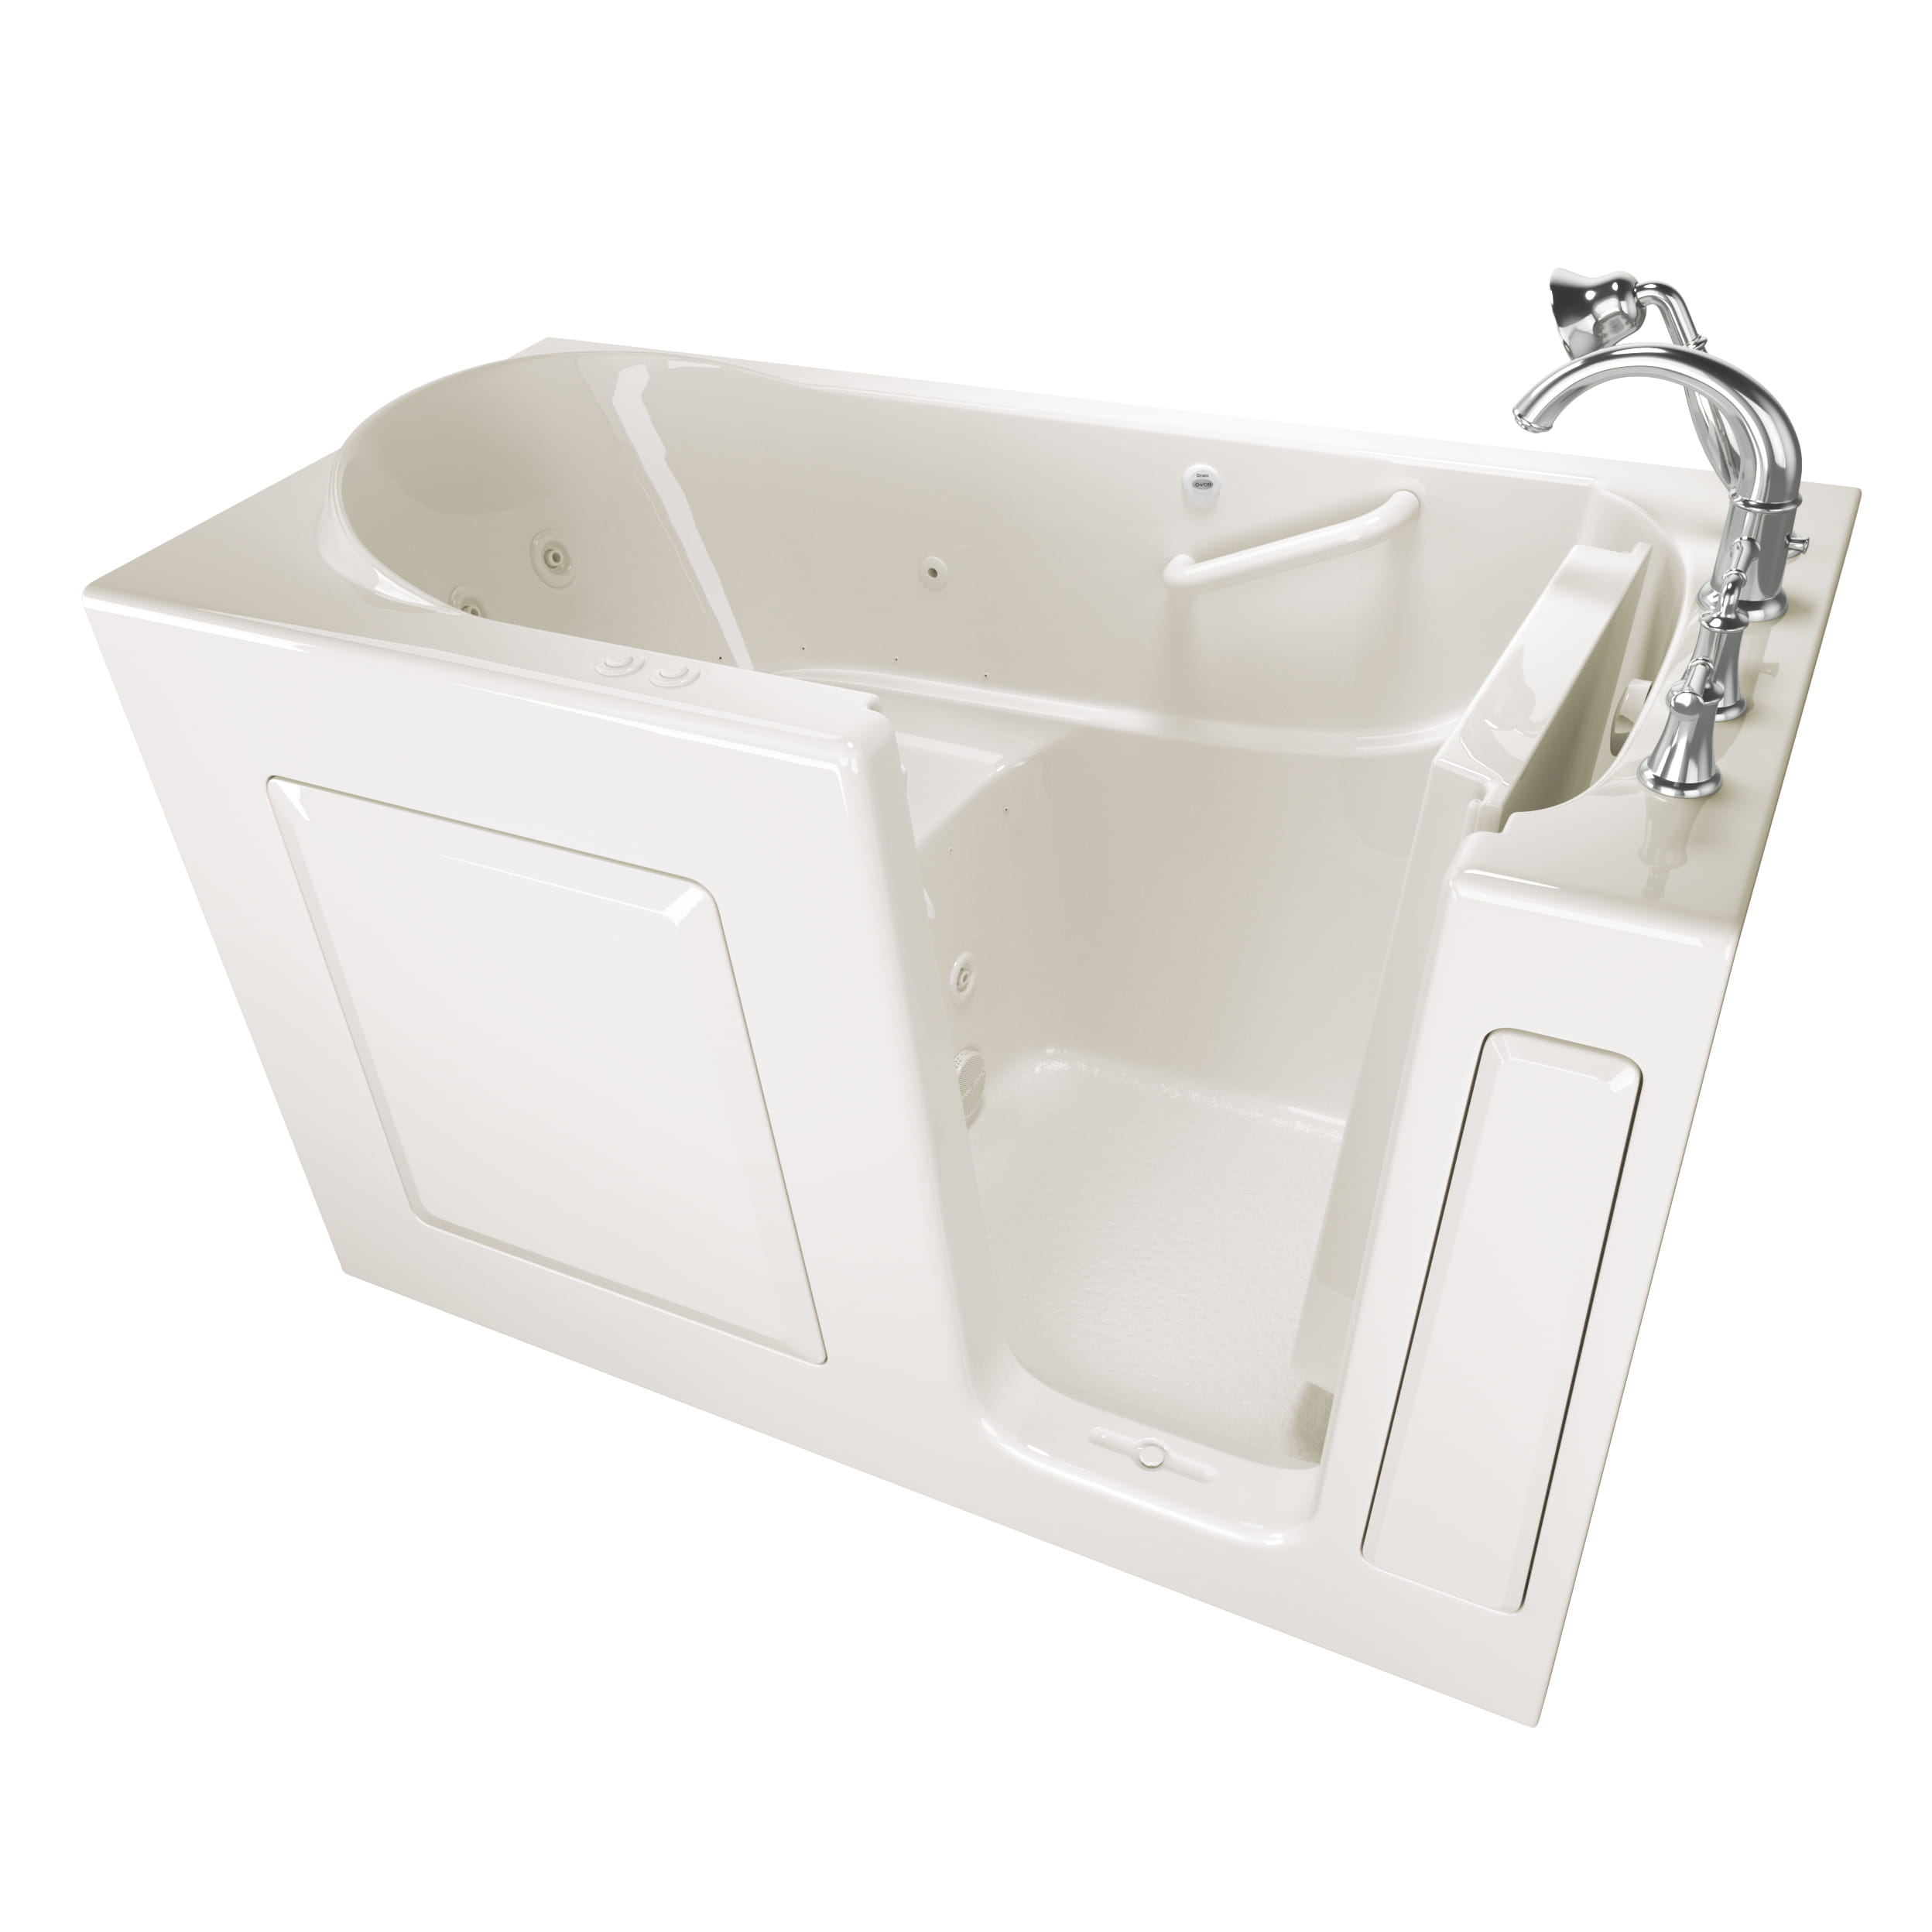 Gelcoat Value Series 30x60 Inch Walk-In Bathtub with Combination Air Spa and Whirlpool Massage System - Right Hand Door and Drain